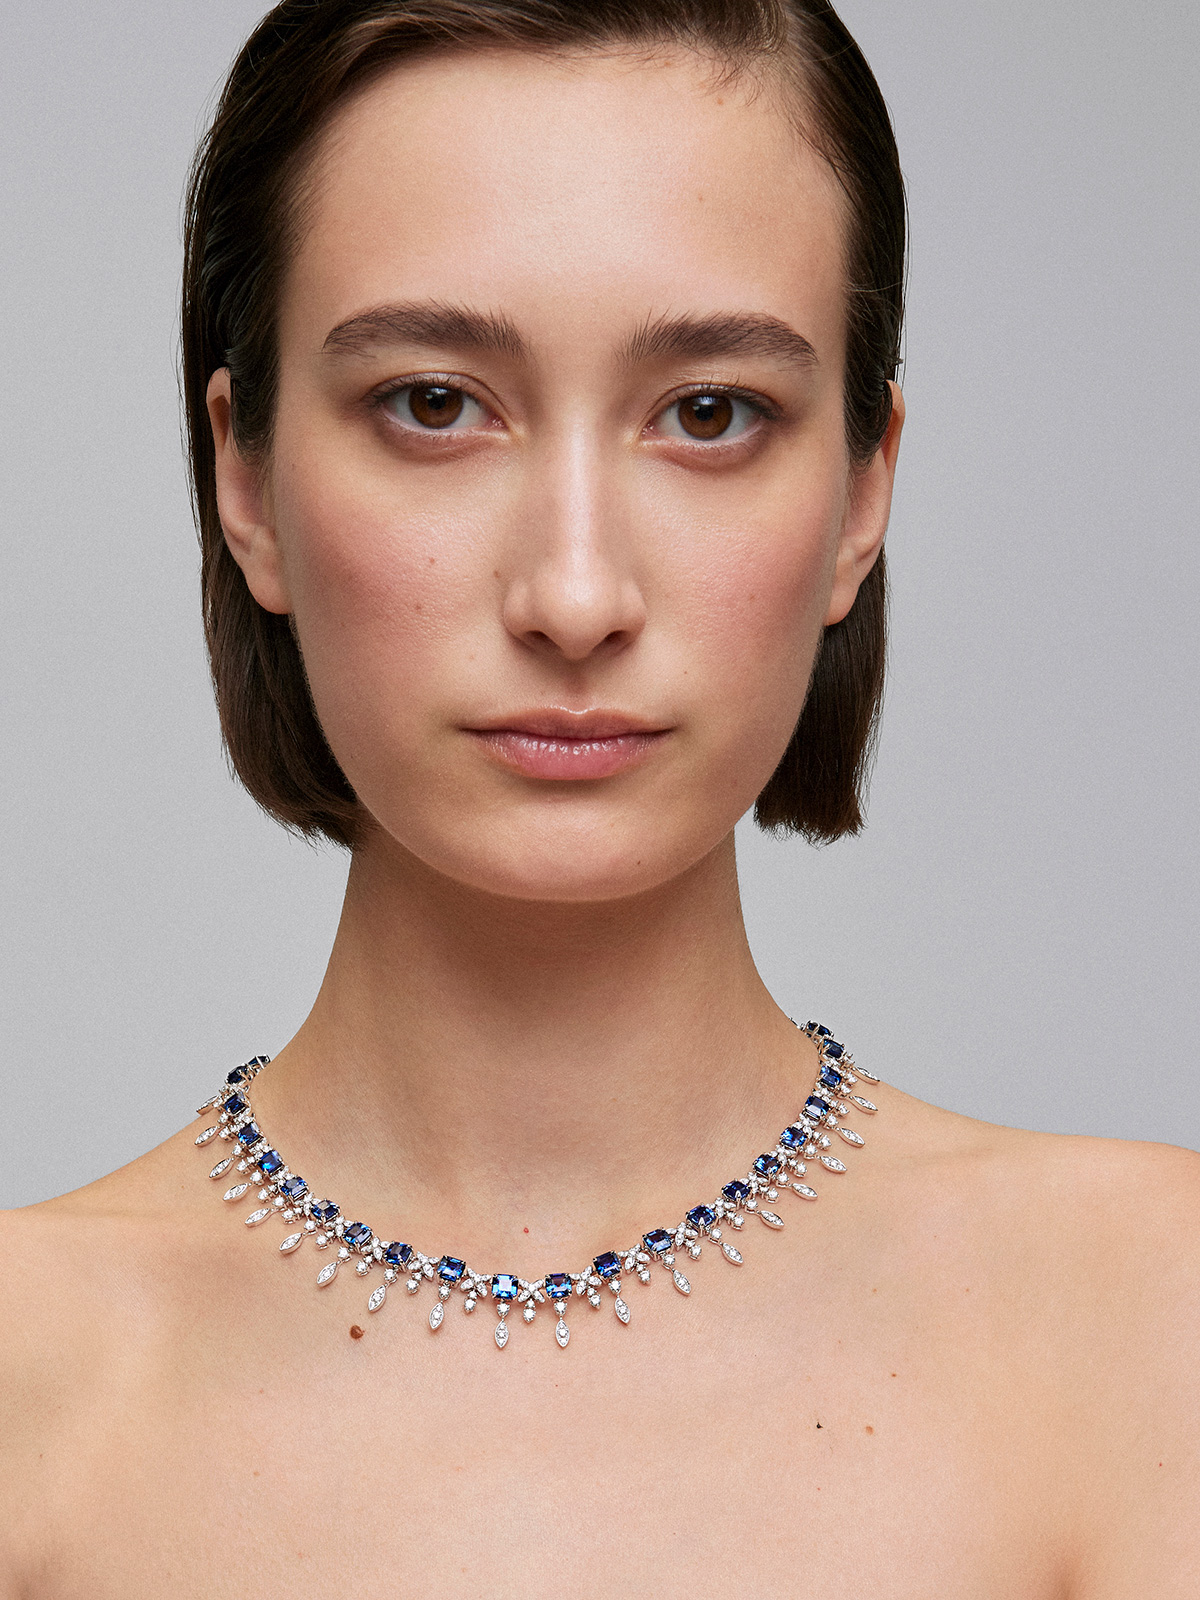 18K white gold necklace with blue sapphires in octagonal size 40.98 cts and white diamonds in 9.48 cts bright size